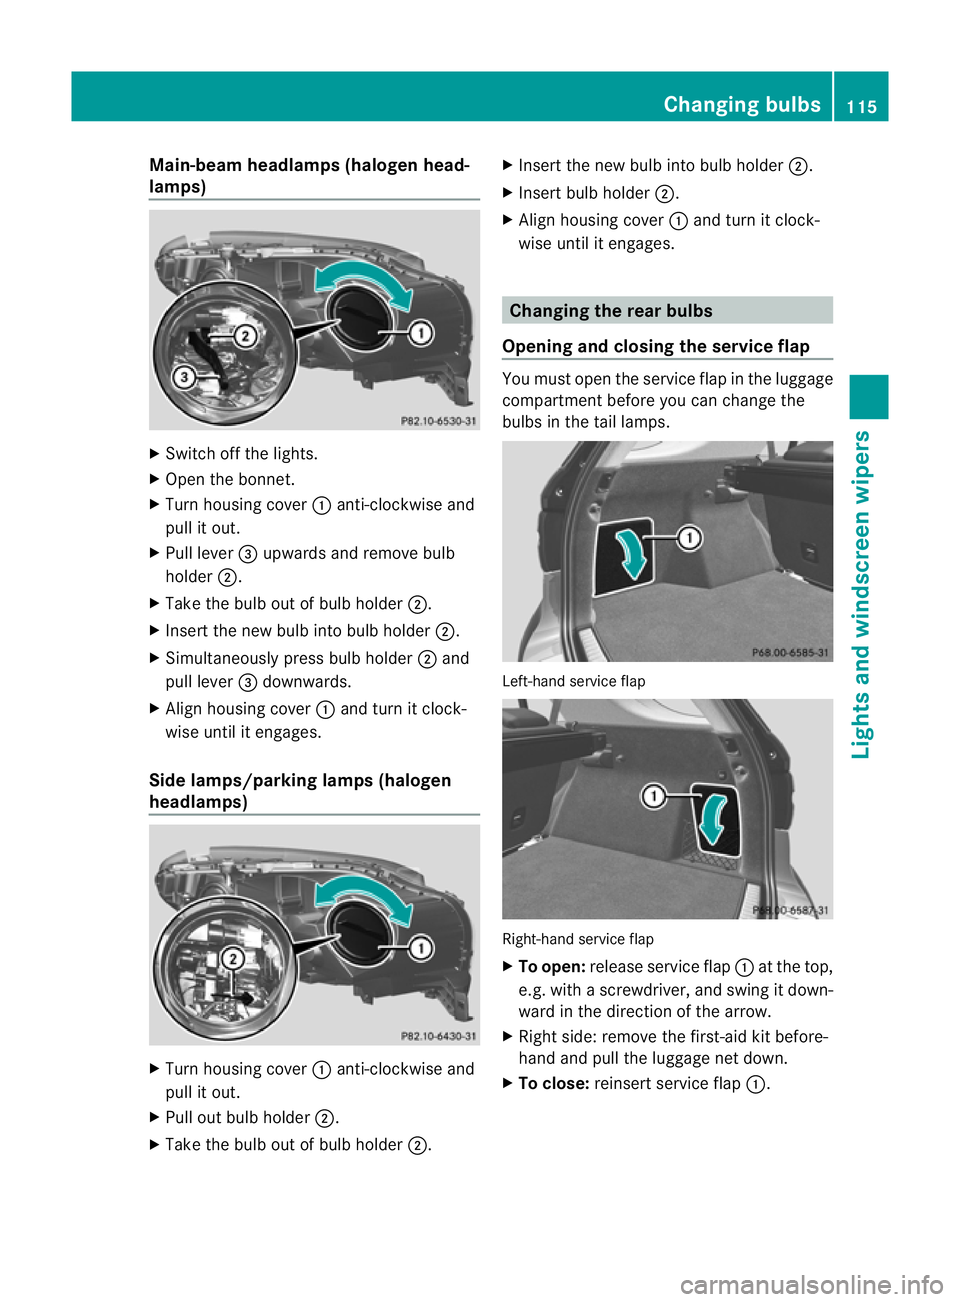 MERCEDES-BENZ M-CLASS SUV 2011  Owners Manual Main-beam headlamps (hal
ogen head-
lamps) X
Switch off the lights.
X Open the bonnet.
X Turn housing cover :anti-clockwis eand
pul lito ut.
X Pul llever =upwards and remove bulb
holder ;.
X Take the 